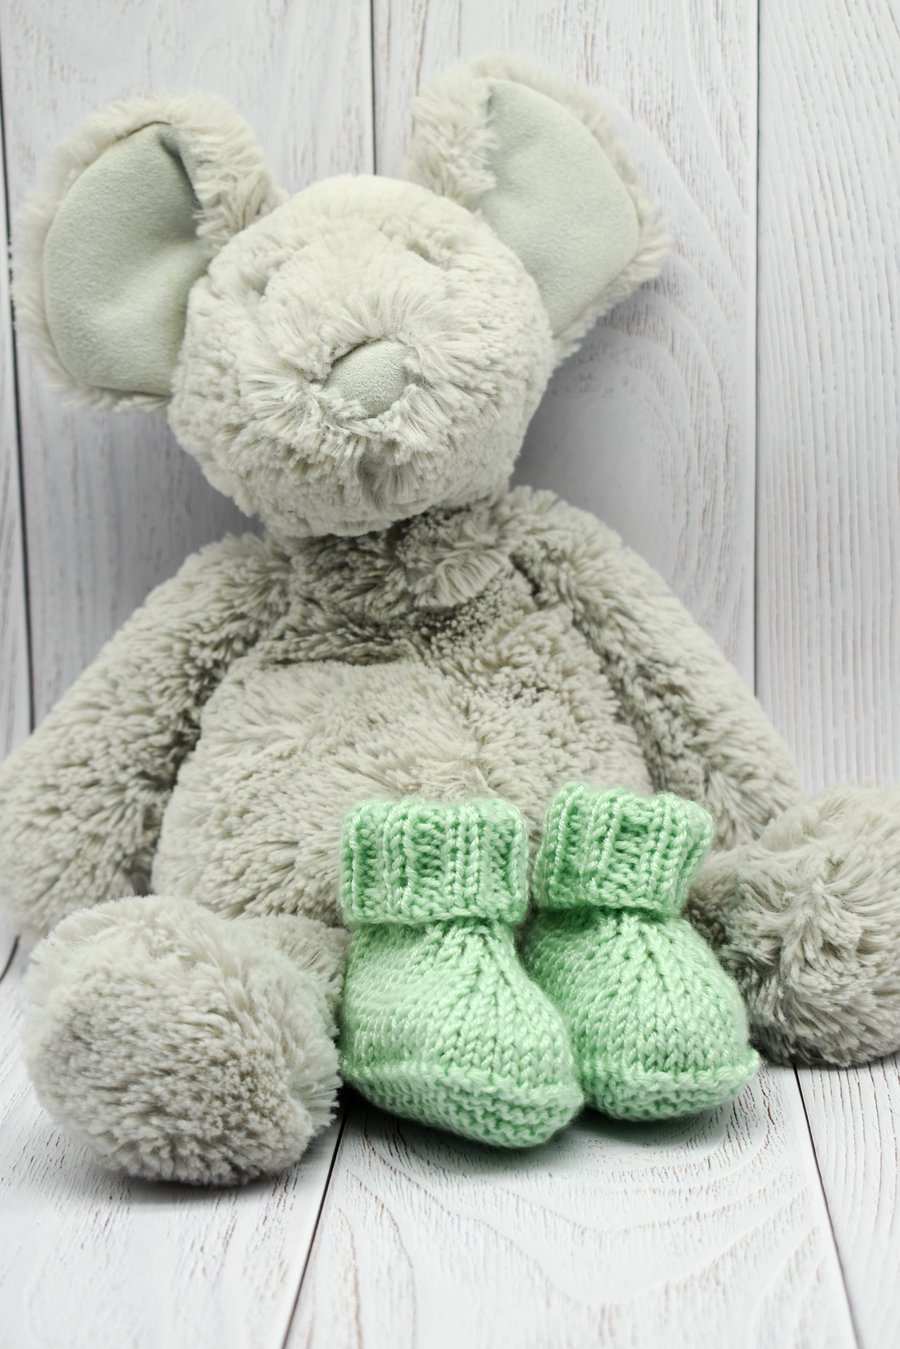 Hand Knitted Baby Booties Newborn Baby -  Mint Green